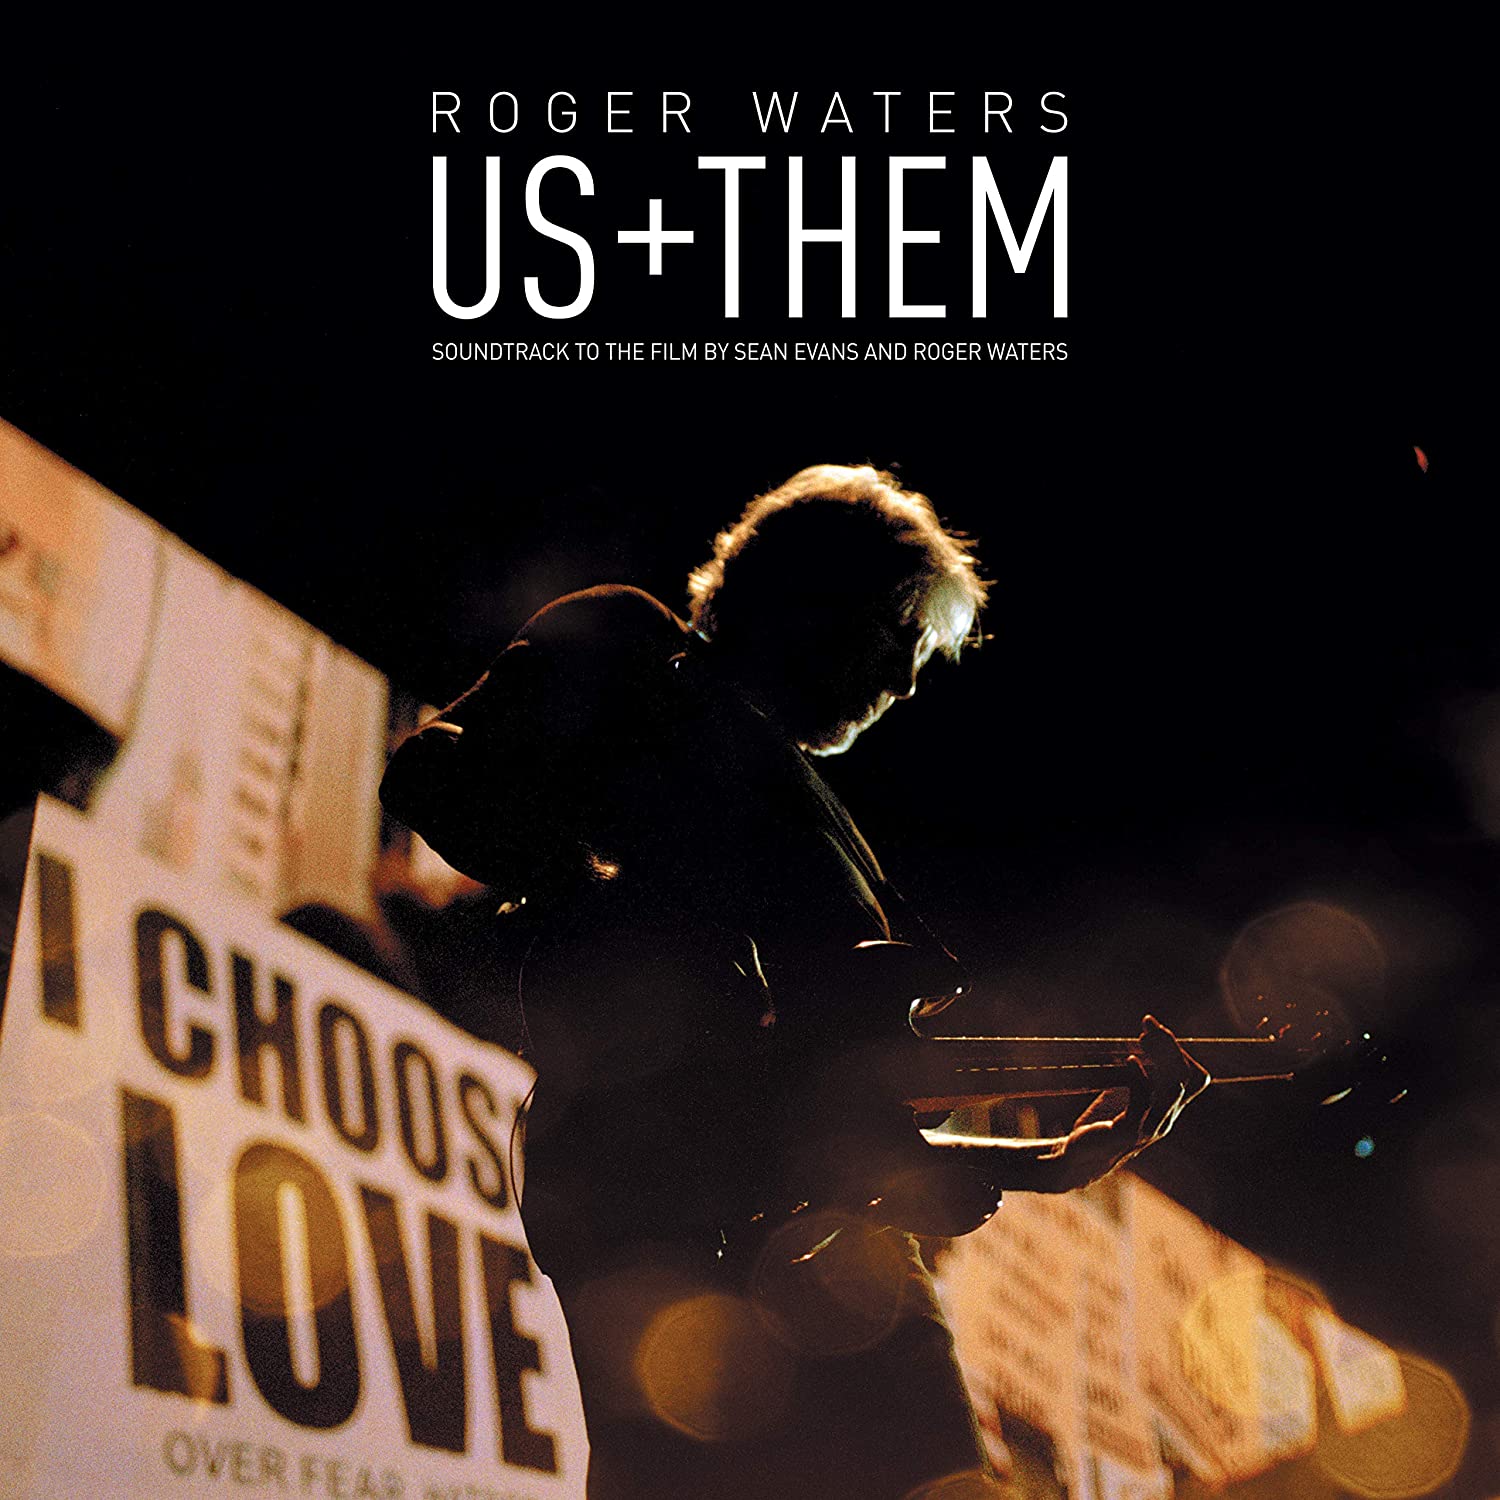 Roger Waters / US + THEM tour film on CD, vinyl, blu-ray and DVD